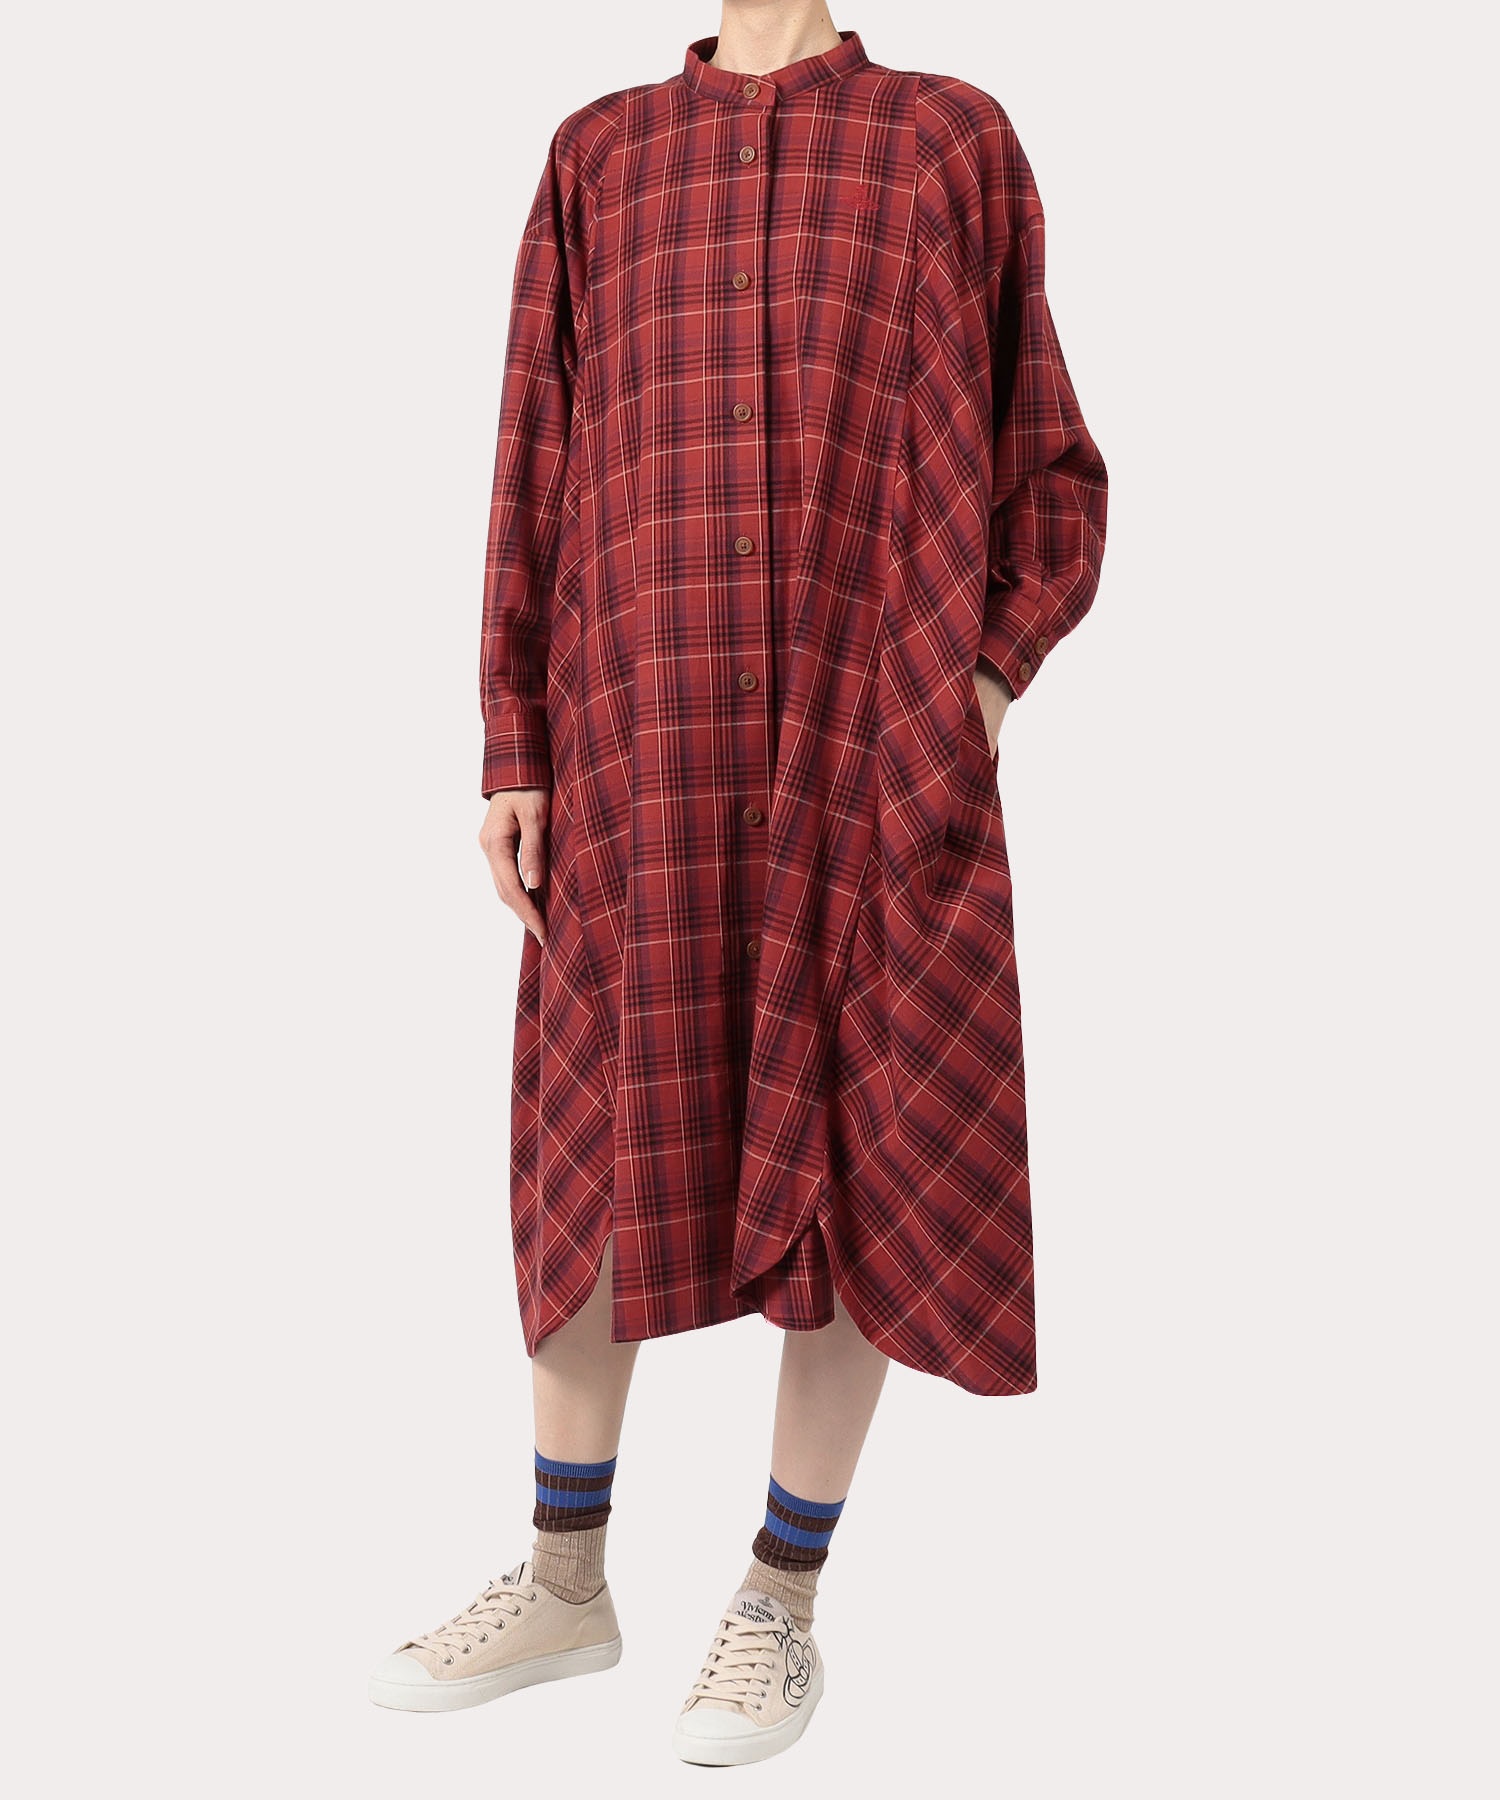 Name. ネーム 18AW 日本製 WOOL/RAYON PLAID HOODED SHIRTS ONE PIECE ウールレーヨン チェックフーデッドシャツワンピース W-NMOP-18AW-002 2 イエロー トップス【Name.】